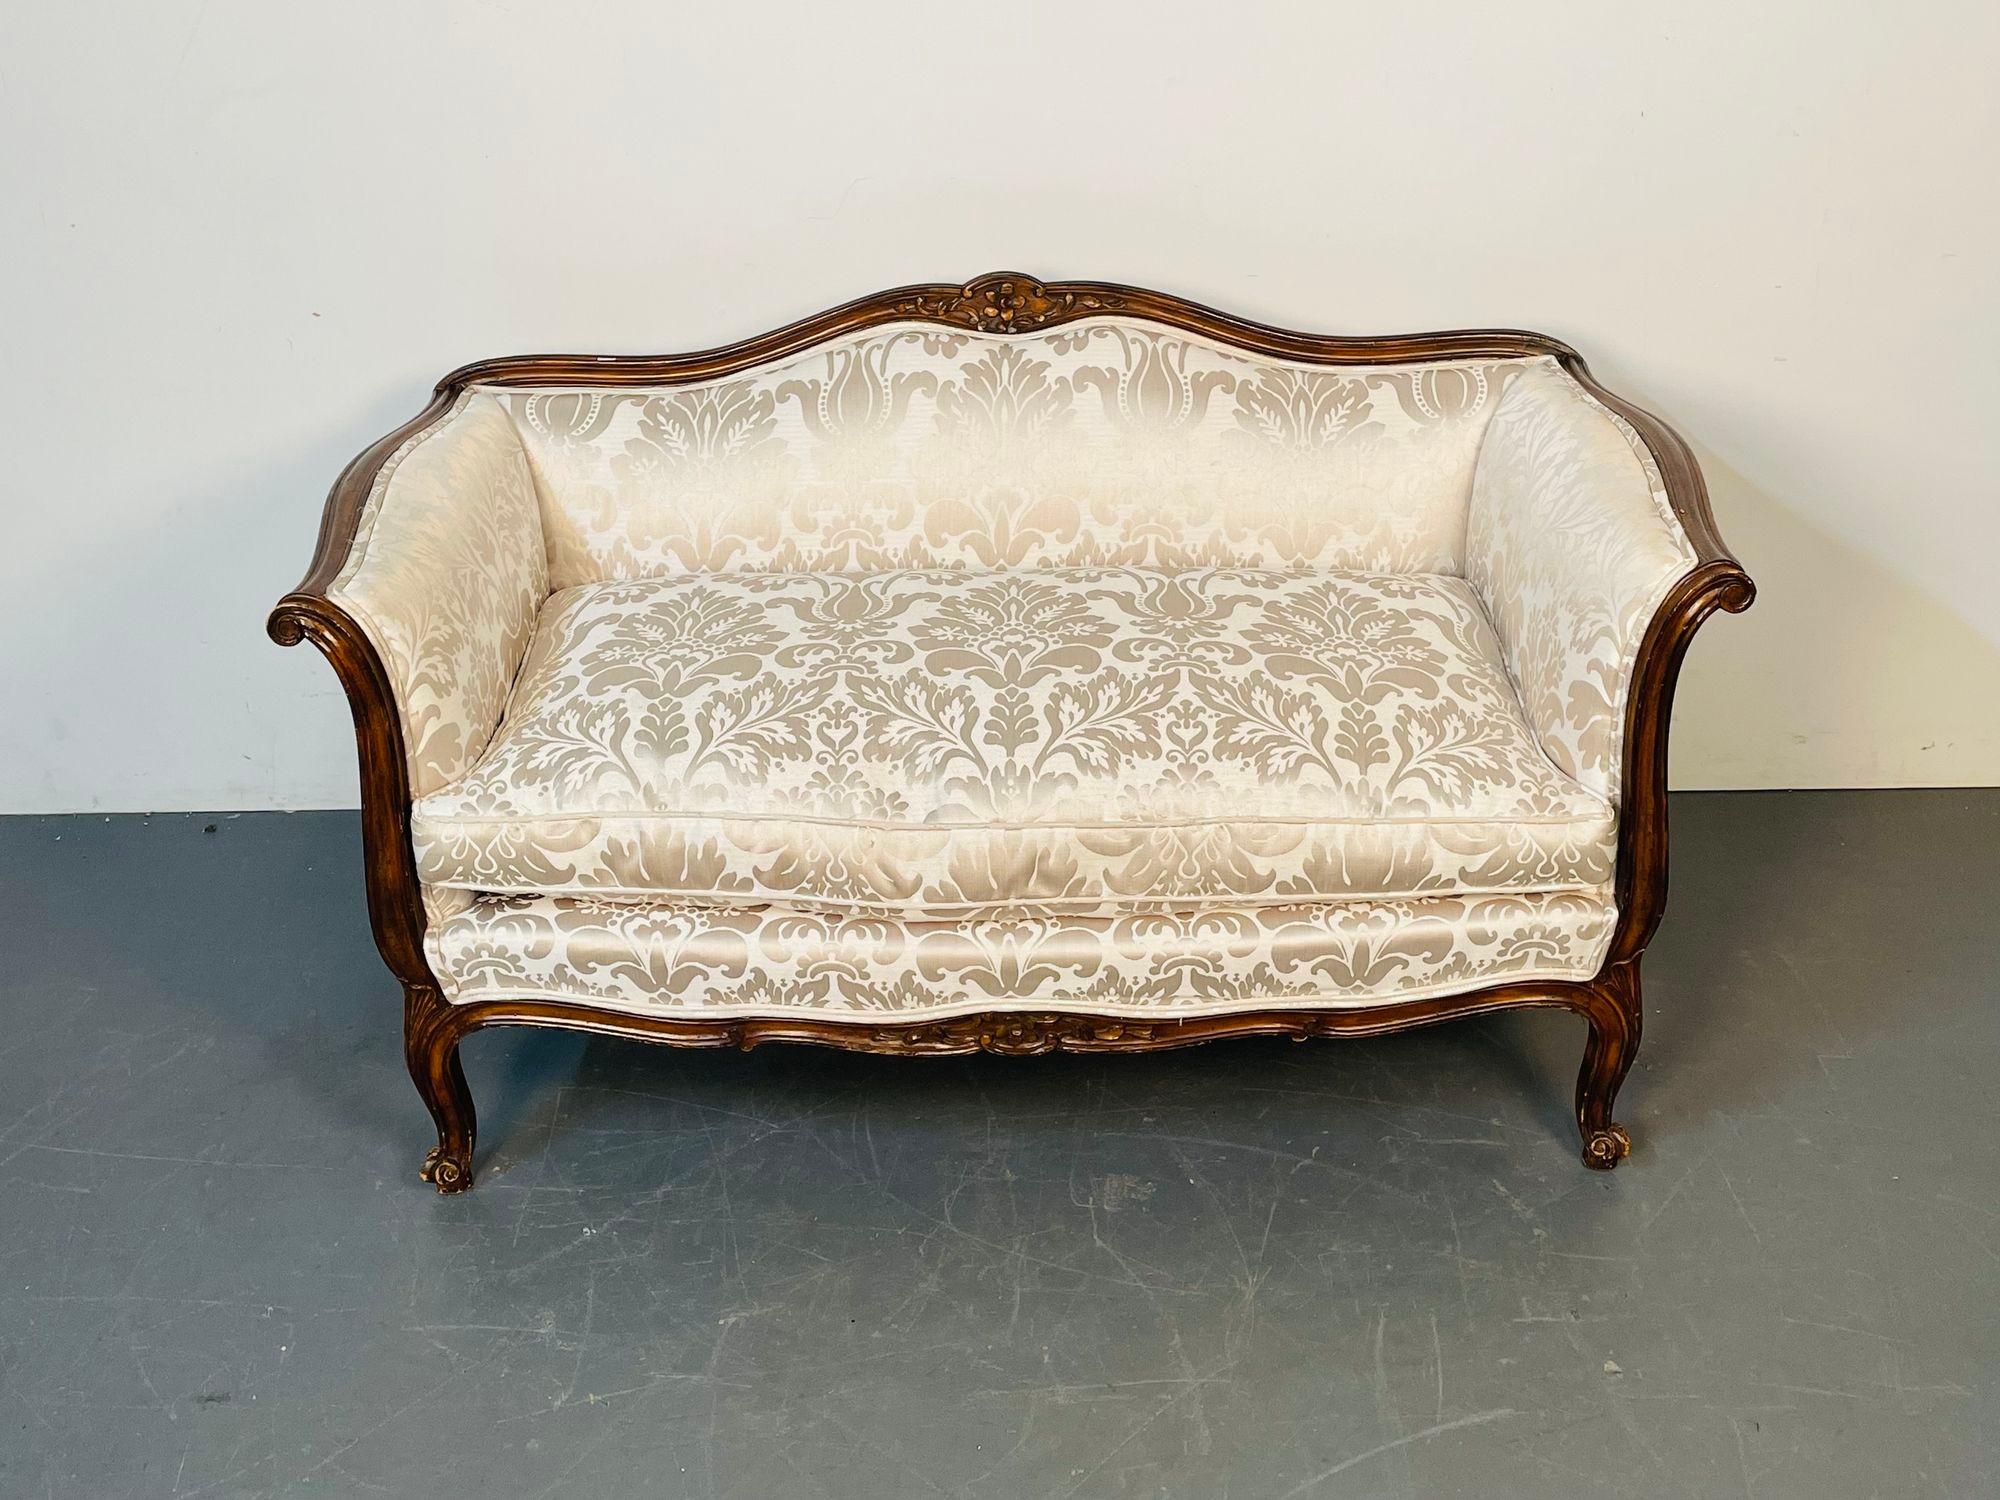 French Louis XV Mahogany Carved Settee, Canape / Sofa, Floral Silk Upholstery For Sale